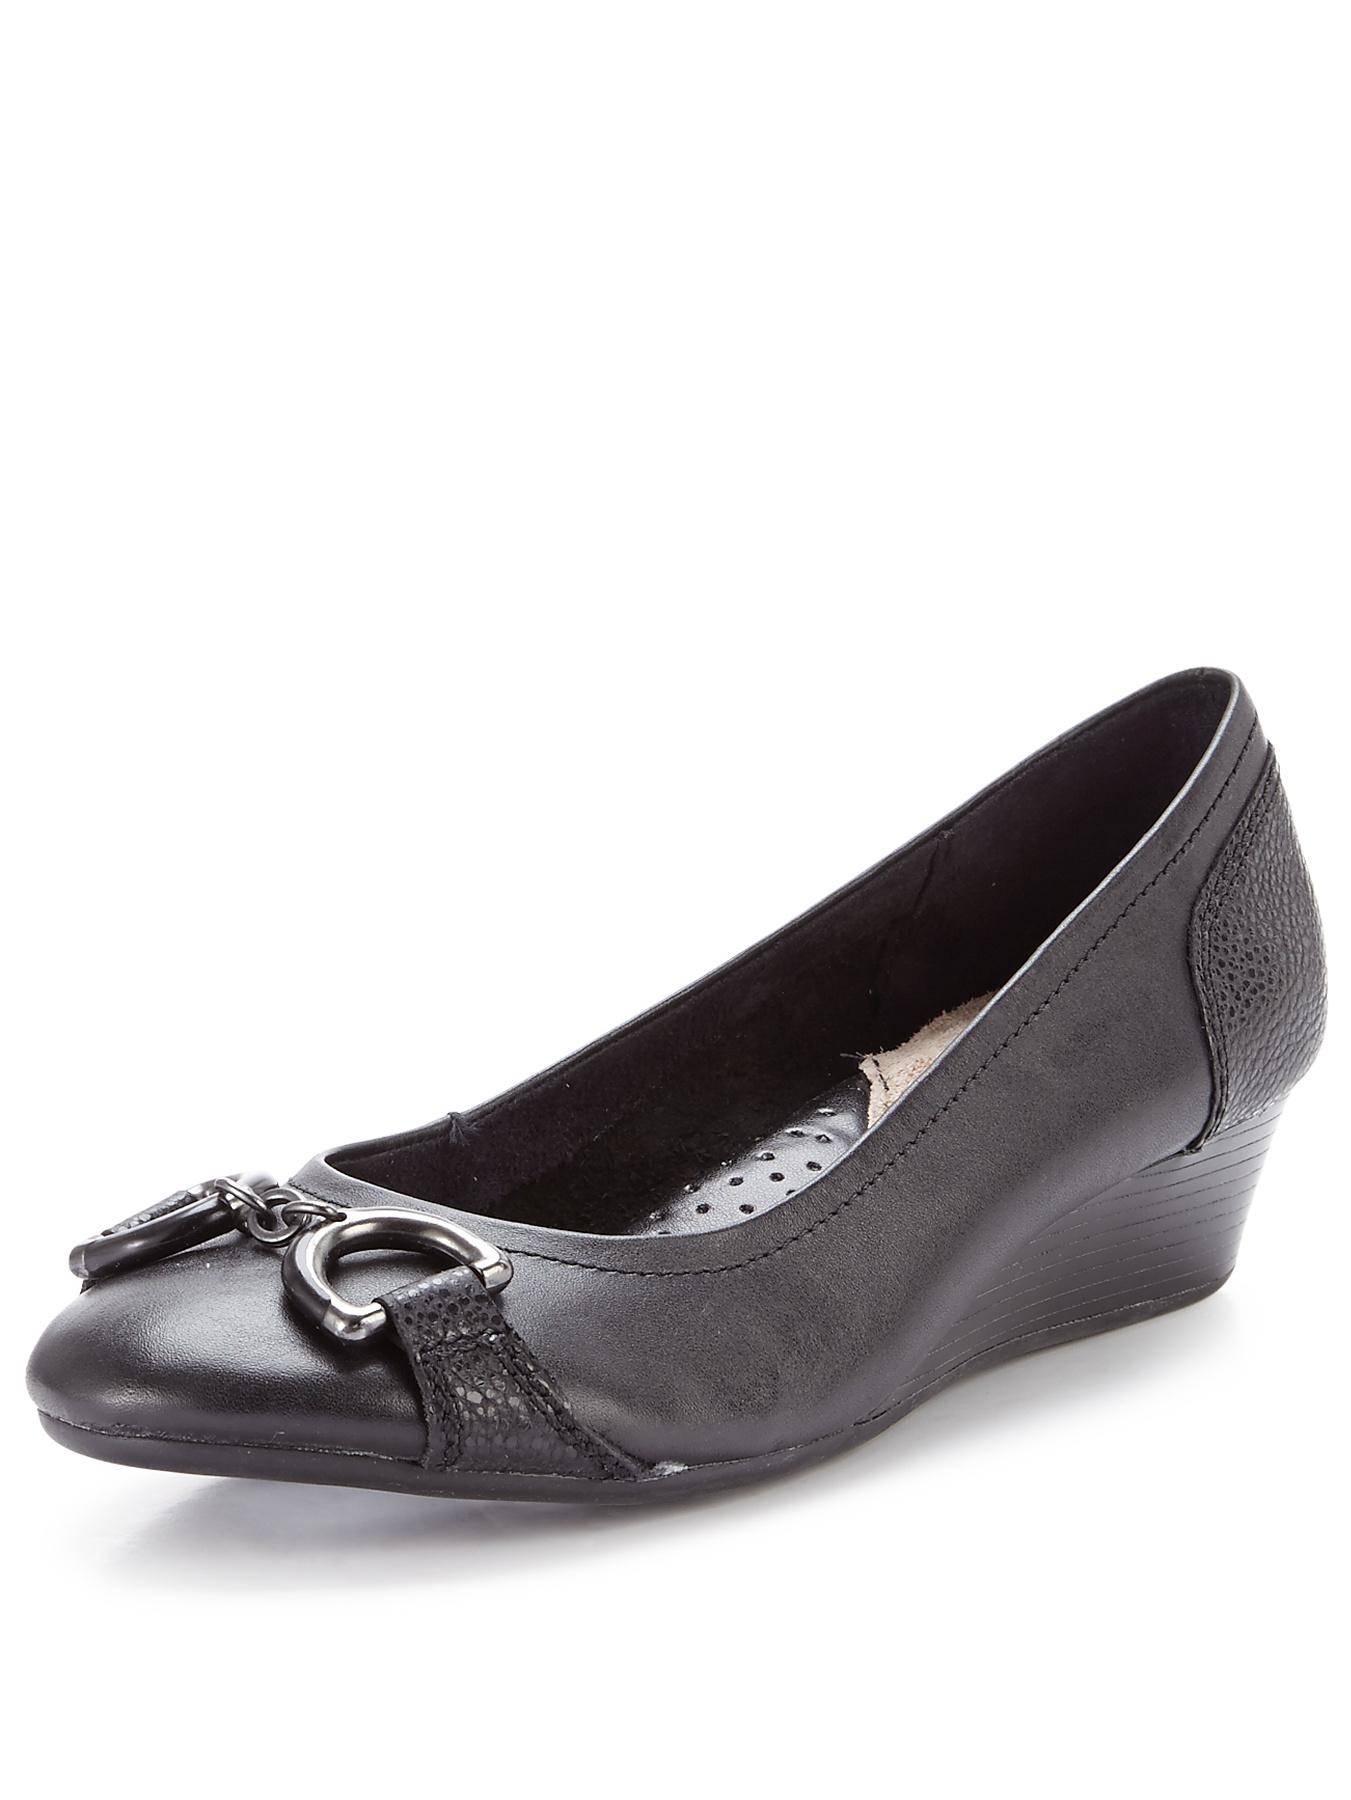 Very, from Littlewoods - Hush Puppies Candid Low Leather Wedge Shoes ...